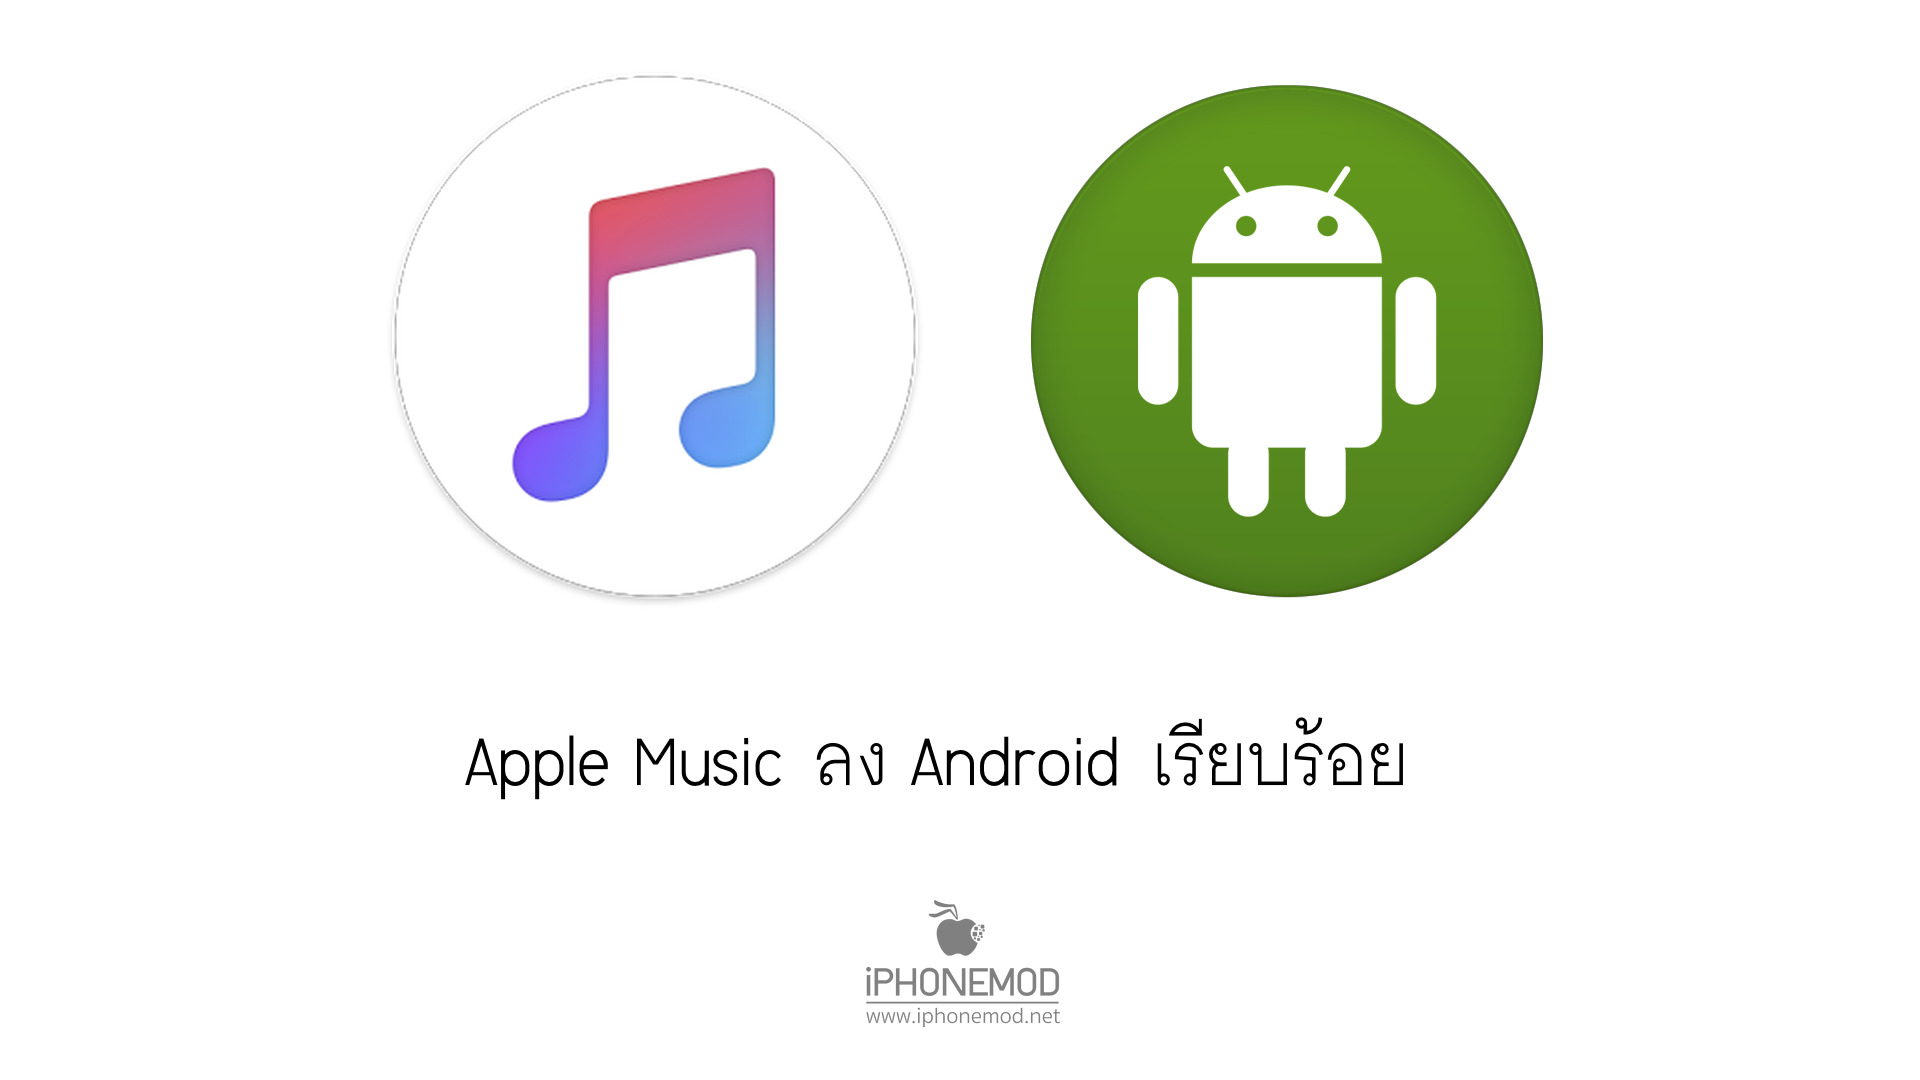 how to transfer my music from android to iphone